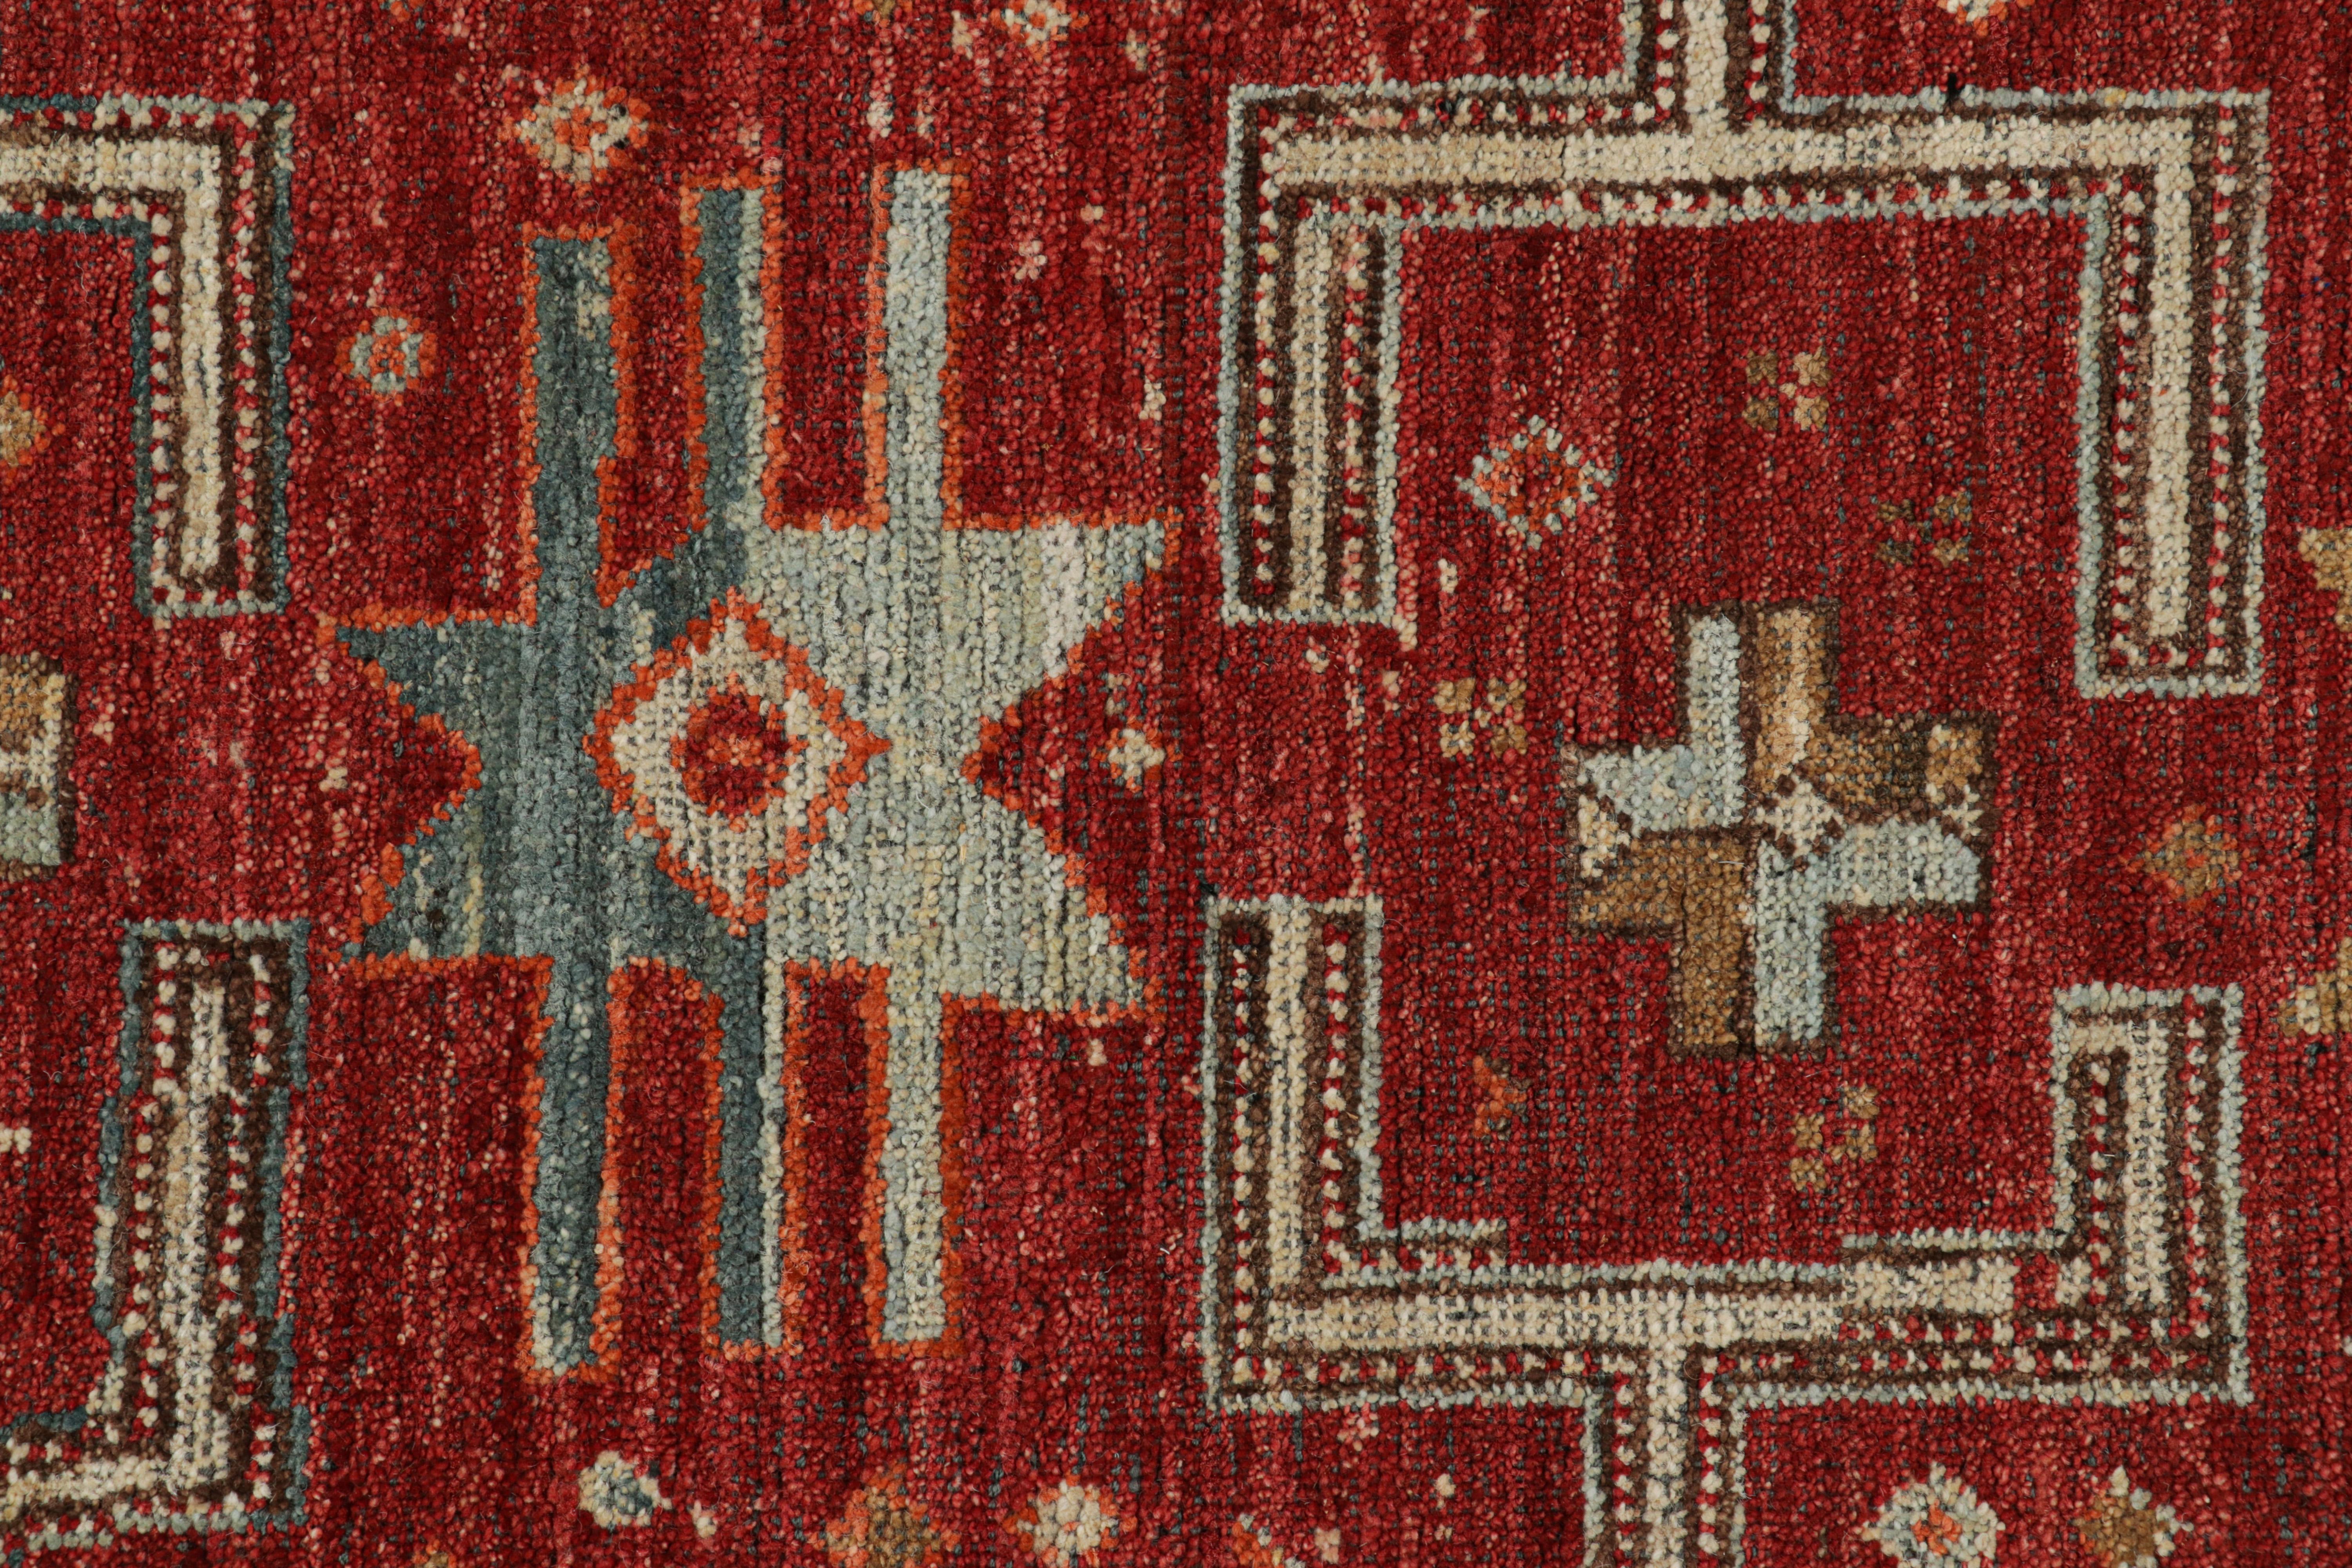 Indian Rug & Kilim’s Tribal Rug in Rich Red, with Colorful Geometric Patterns For Sale